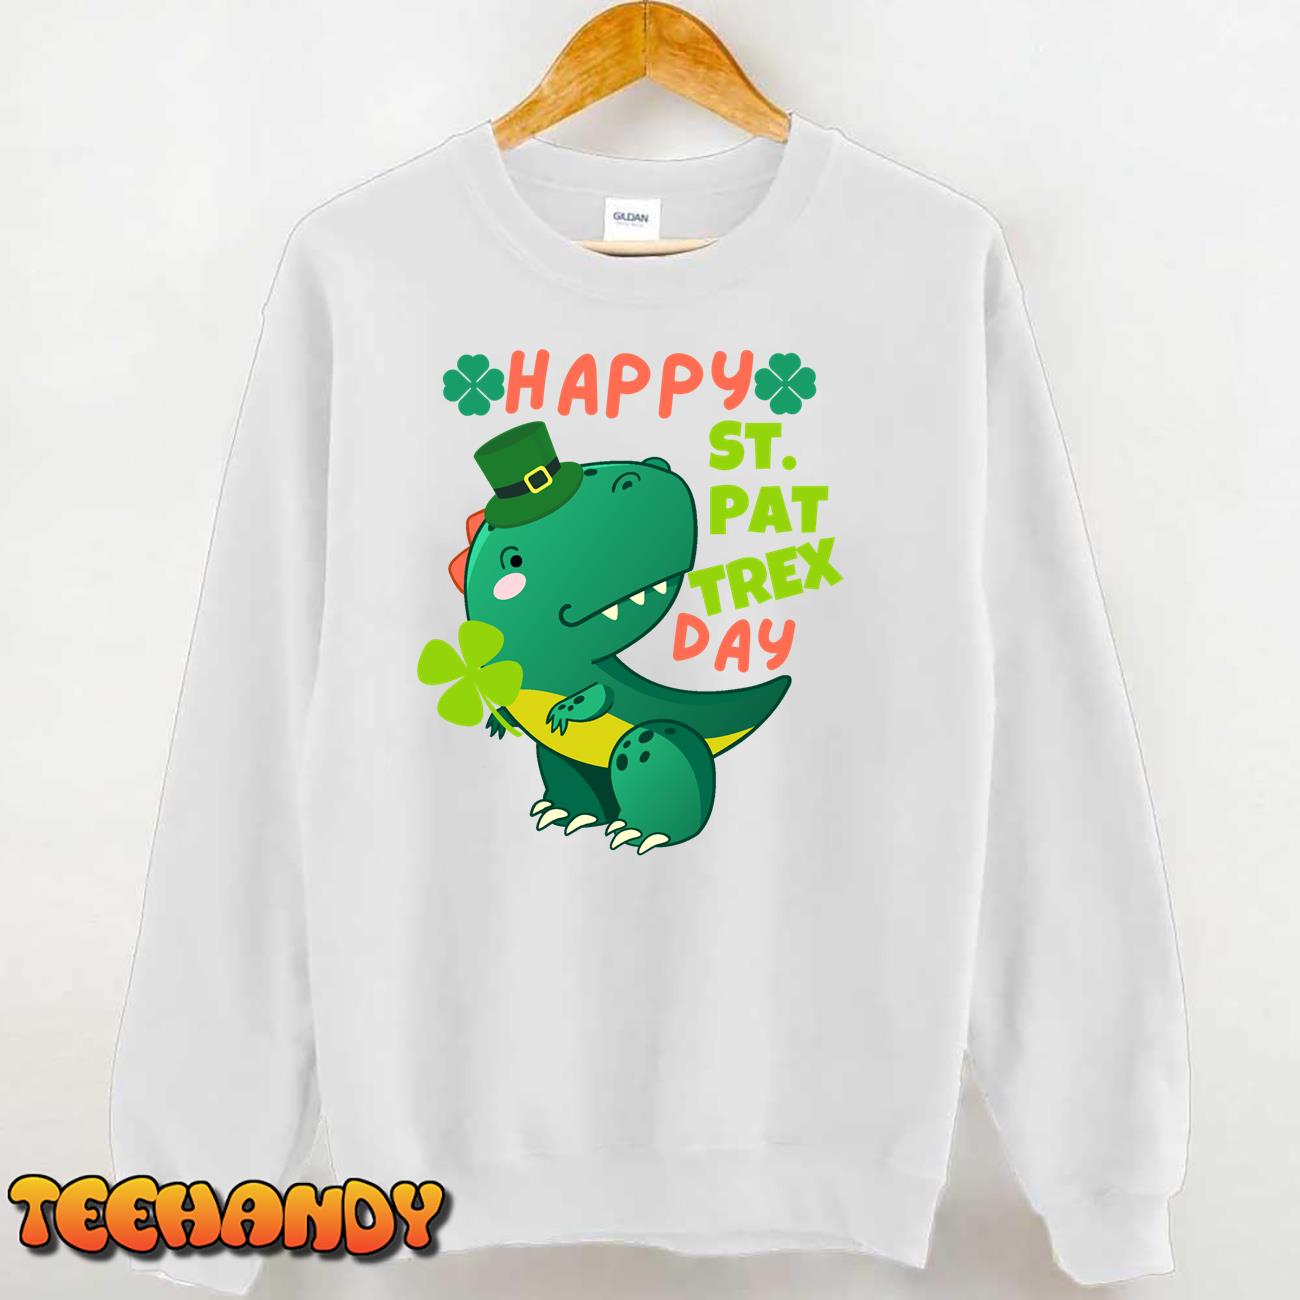 Happy St. Pattrex Day, Cute and Funny Dinosaur for St. Patrick’s Day T-Shirt